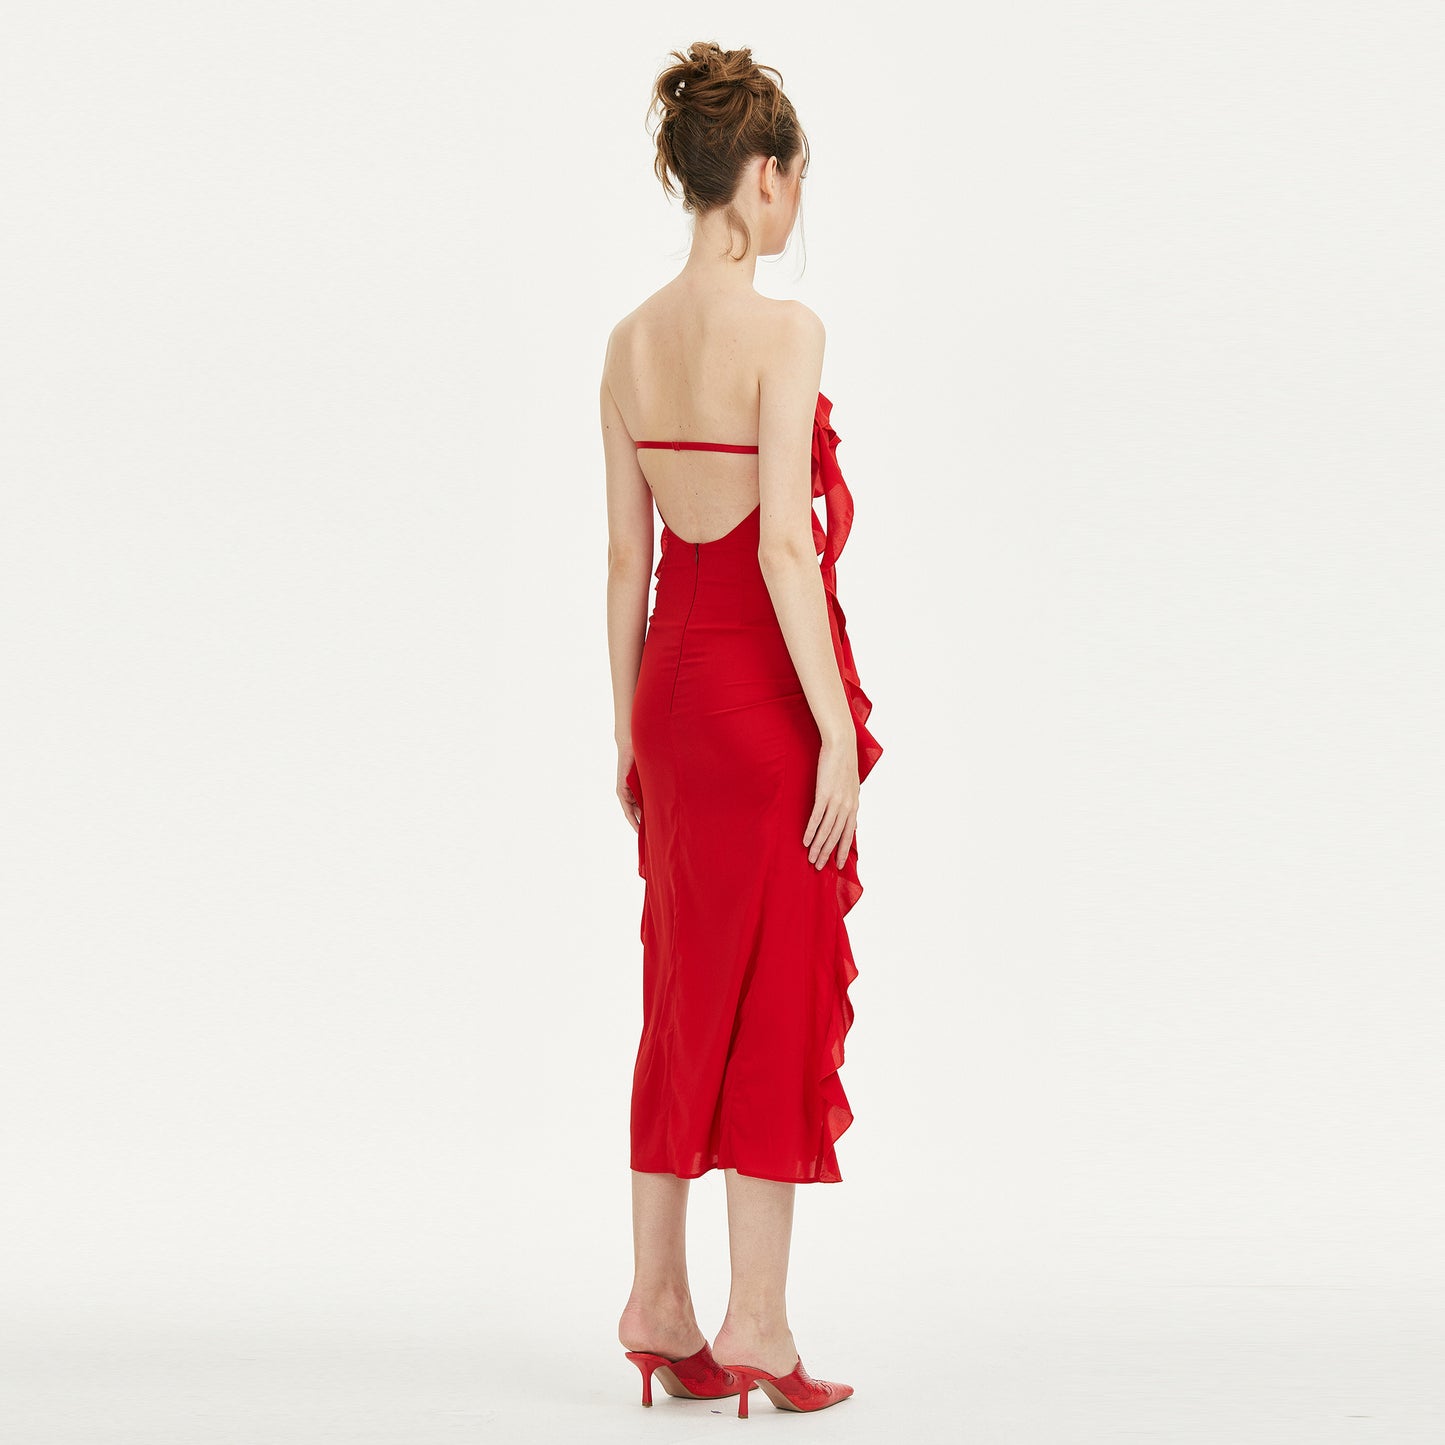 Crush Strapless Dress in Red